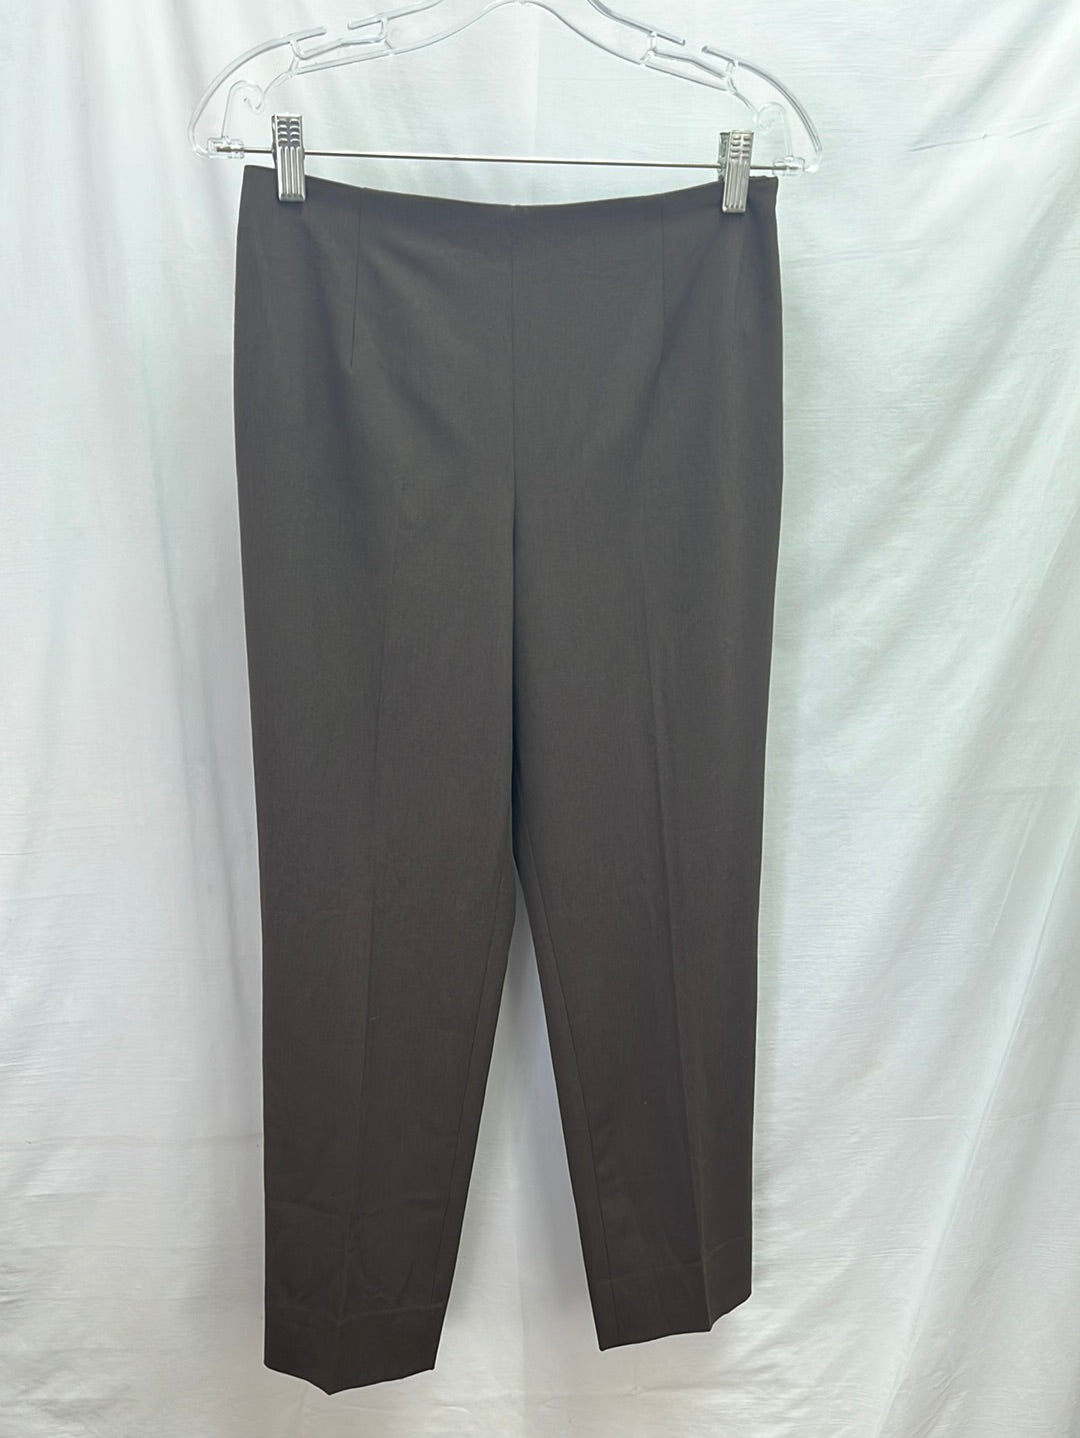 NWT -- Talbots Chestnut Brown Stretch Trouser Pants -- 6